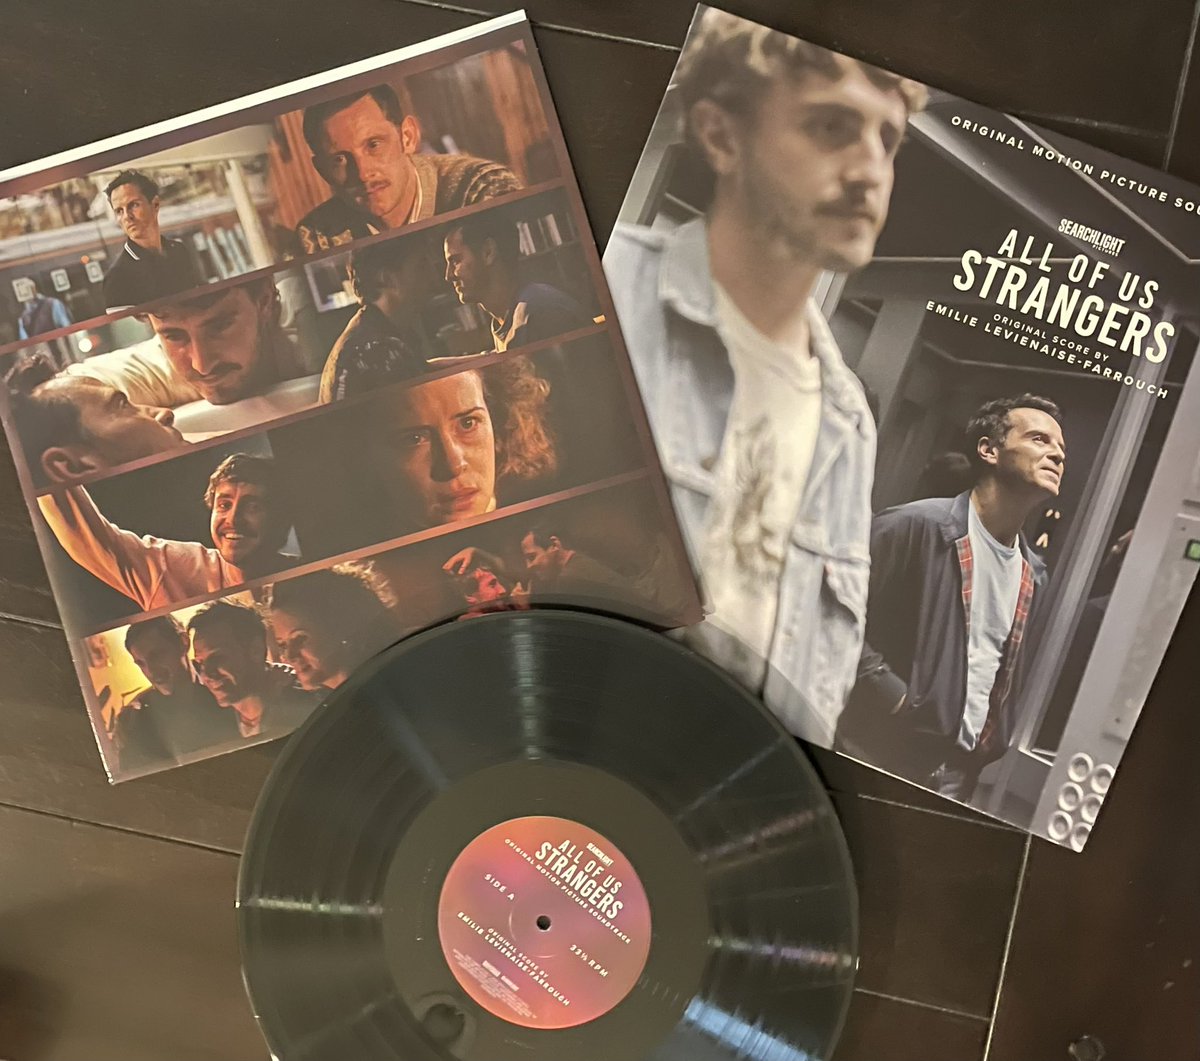 Leaning into this sad moody weather with the newly released score/ soundtrack from #AllOfUsStrangers. And, no joke, a said an audible “awwww” when I opened up the shipping mailer. 🥹😭